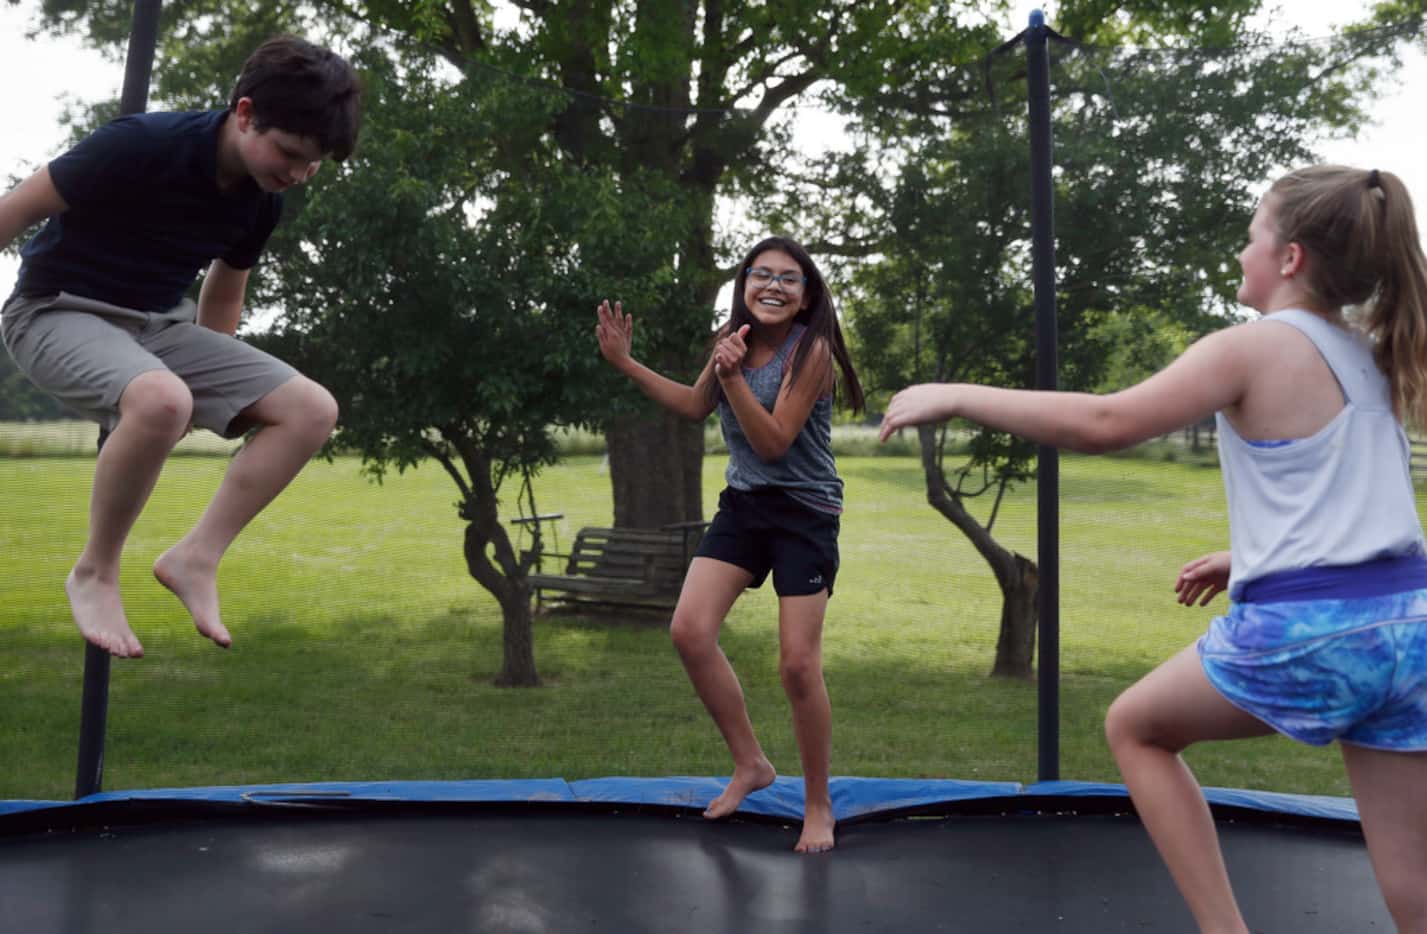 Emi plays on a trampoline at home with friends Simon Cooper (left) and Spencer Butrum...